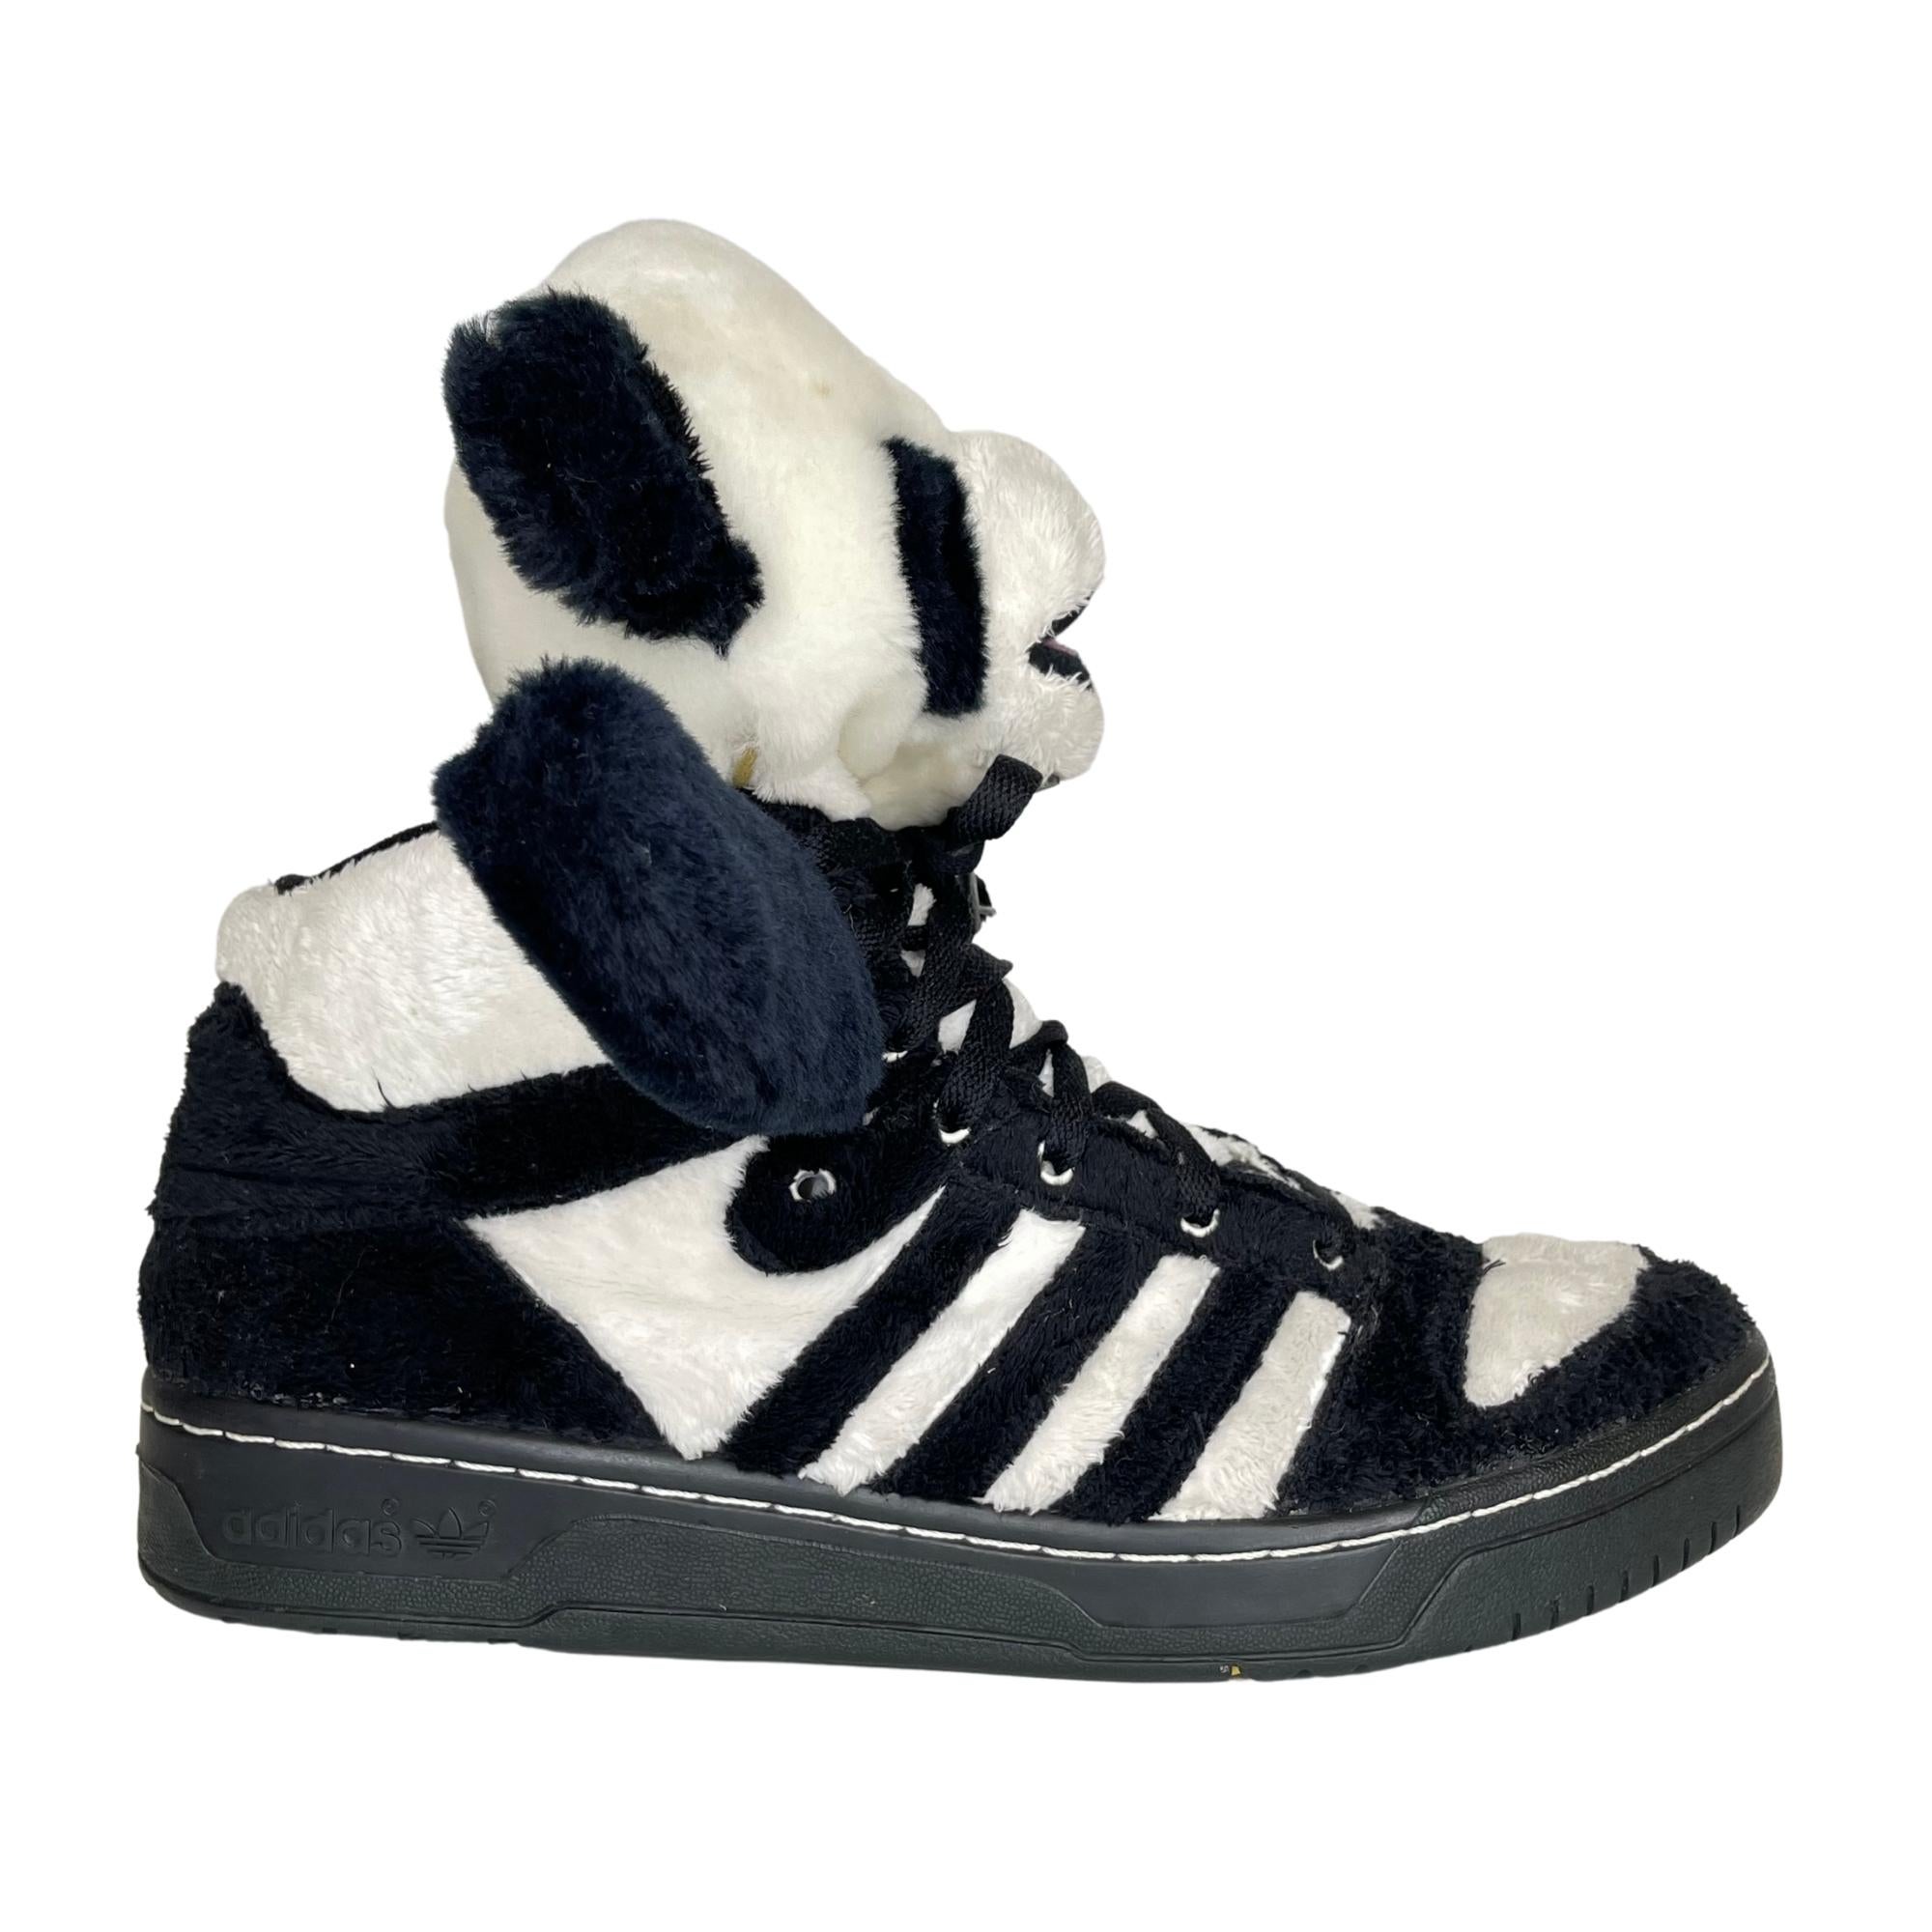 COLOR: Black/white
ITEM CODE: U42612
SIZE: 11.5 US / 46 EU
CONDITION: Excellent - like new shoes. 

Made in Indonesia